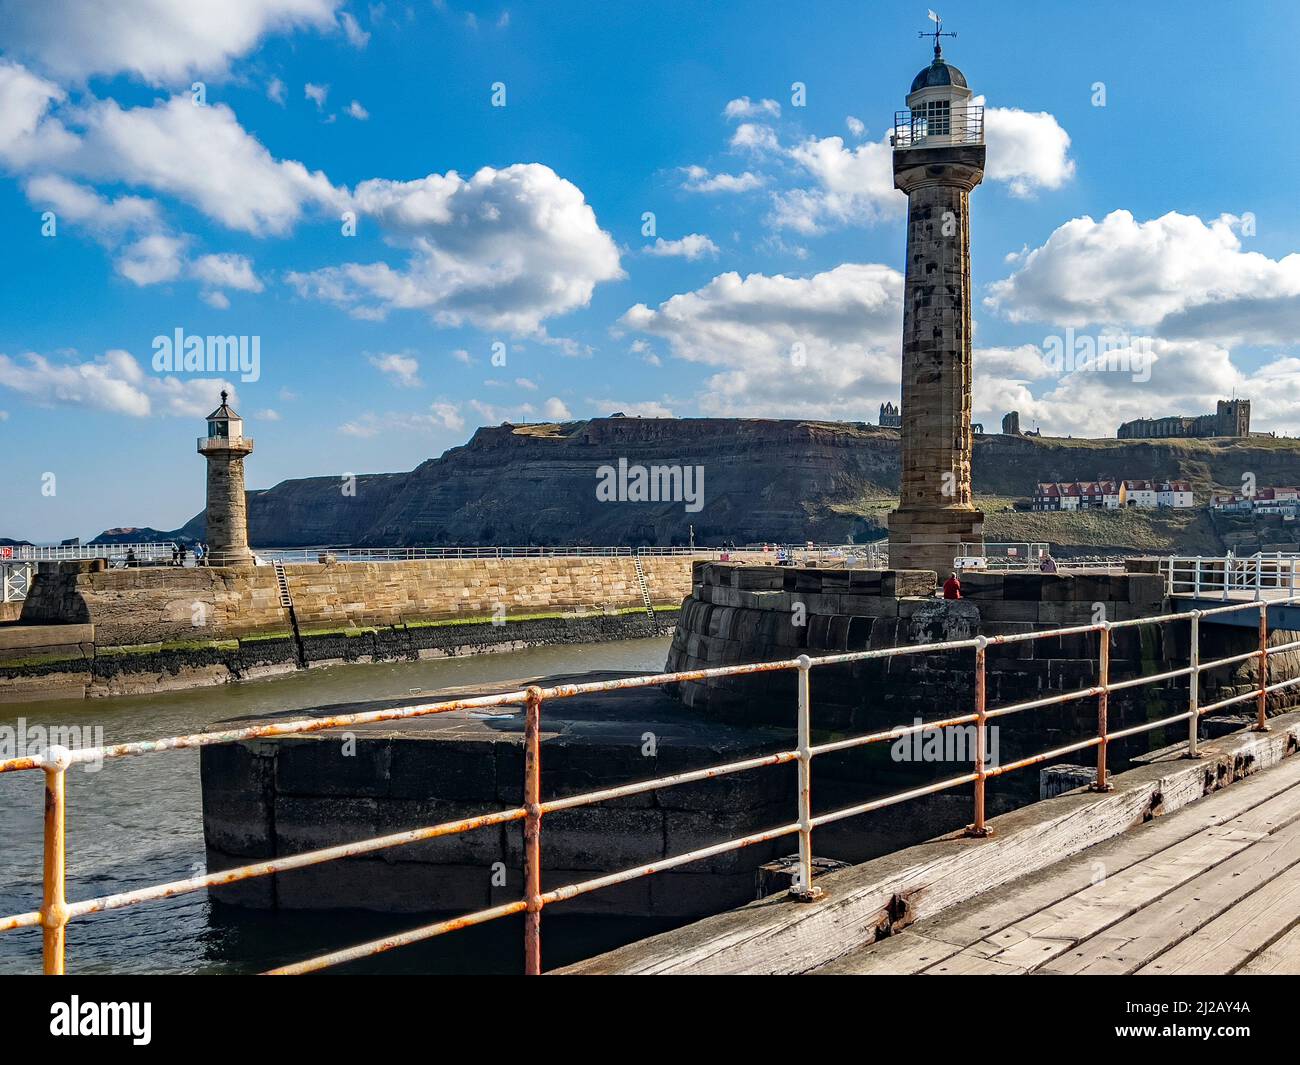 The lighthouse and pier at the entrance to the harbor in the coastal town of Whitby in North Yorkshire on the northeast coast of England. Stock Photo